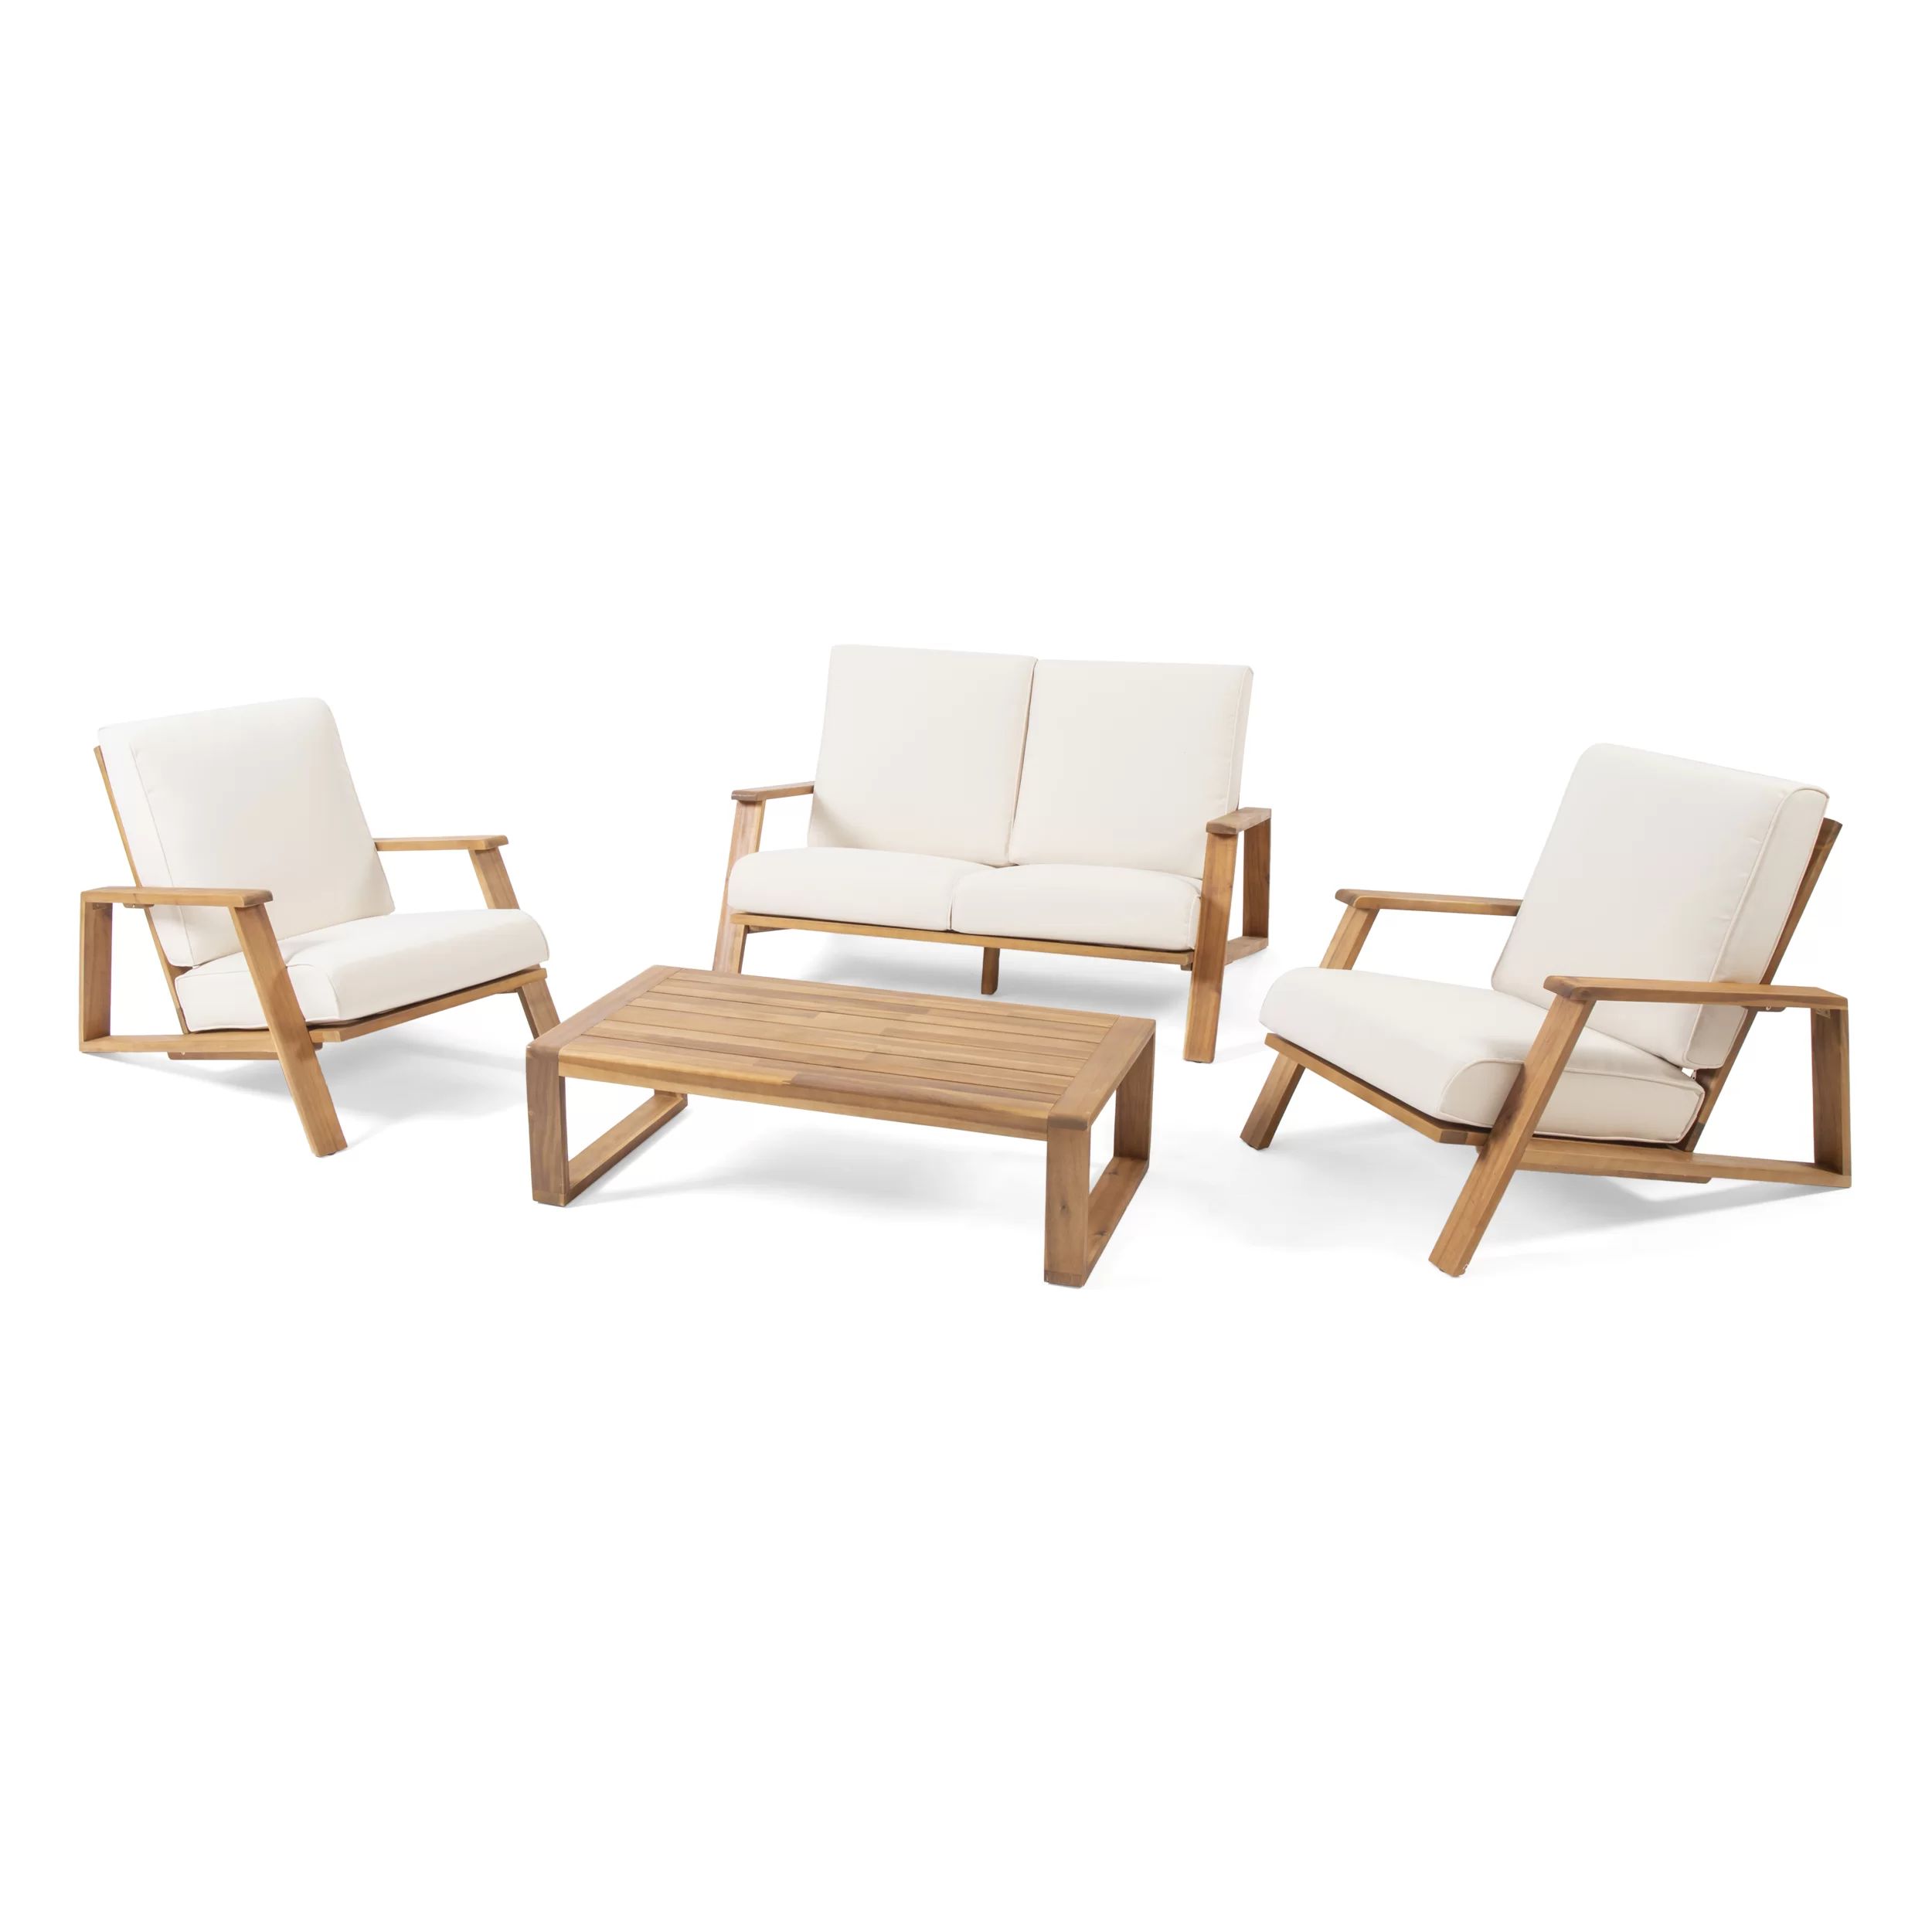 Isham 4 - Person Seating Group with Cushions | Wayfair North America